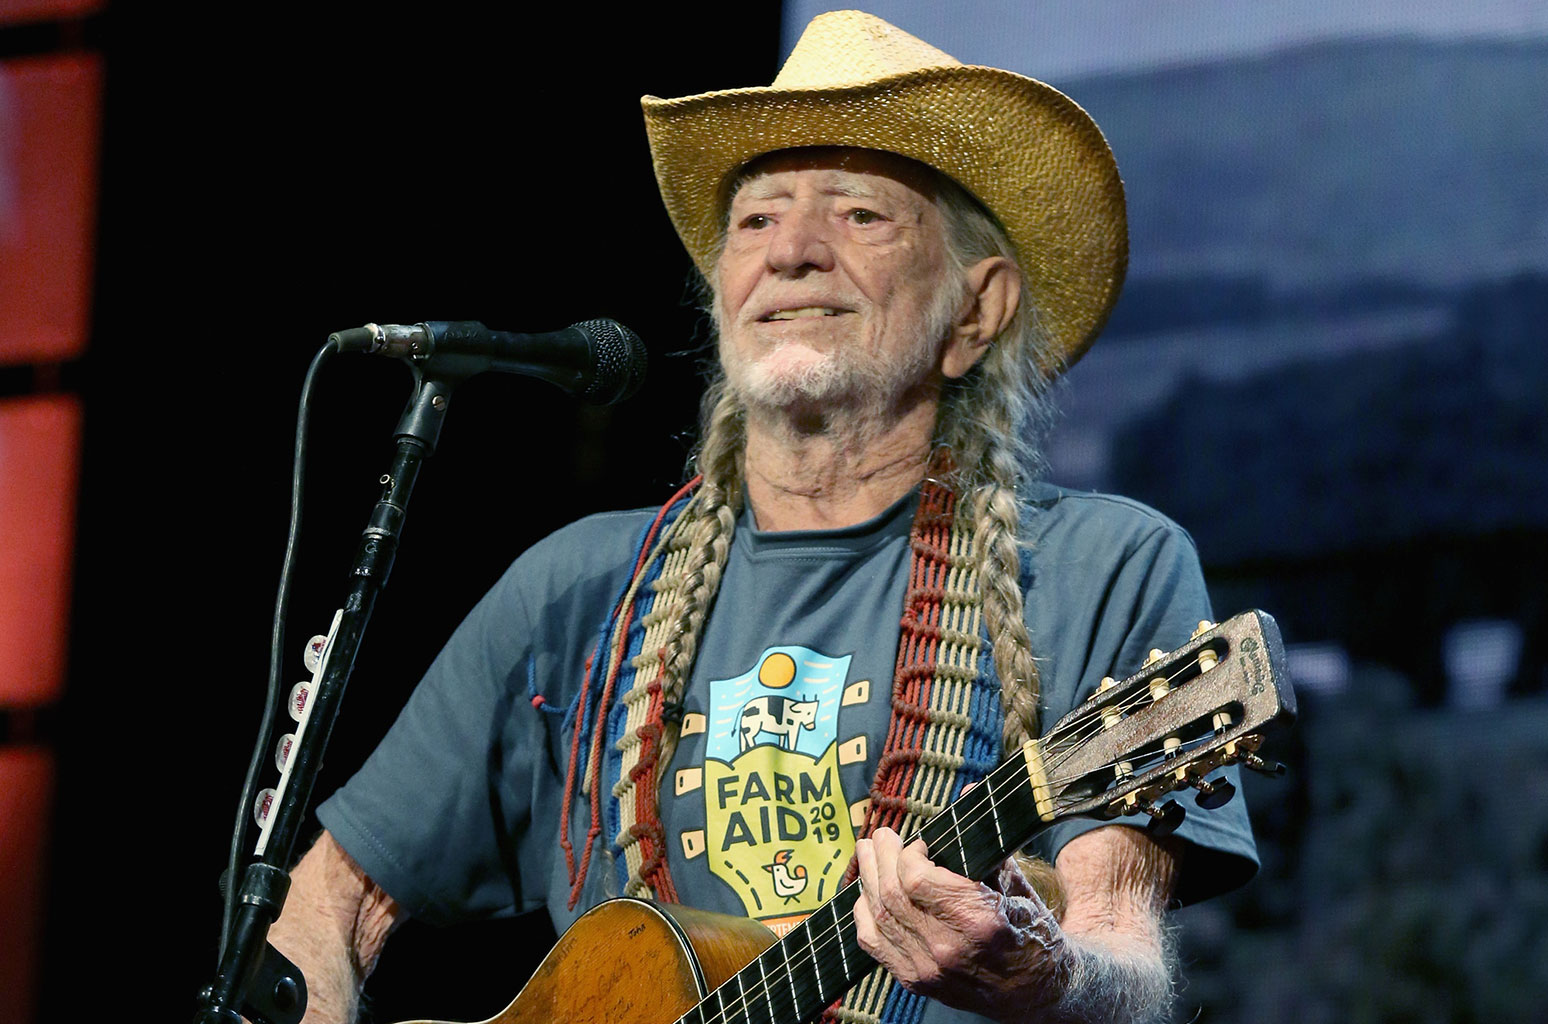 There's a Hay Replica of Willie Nelson - www.billboard.com - Virginia